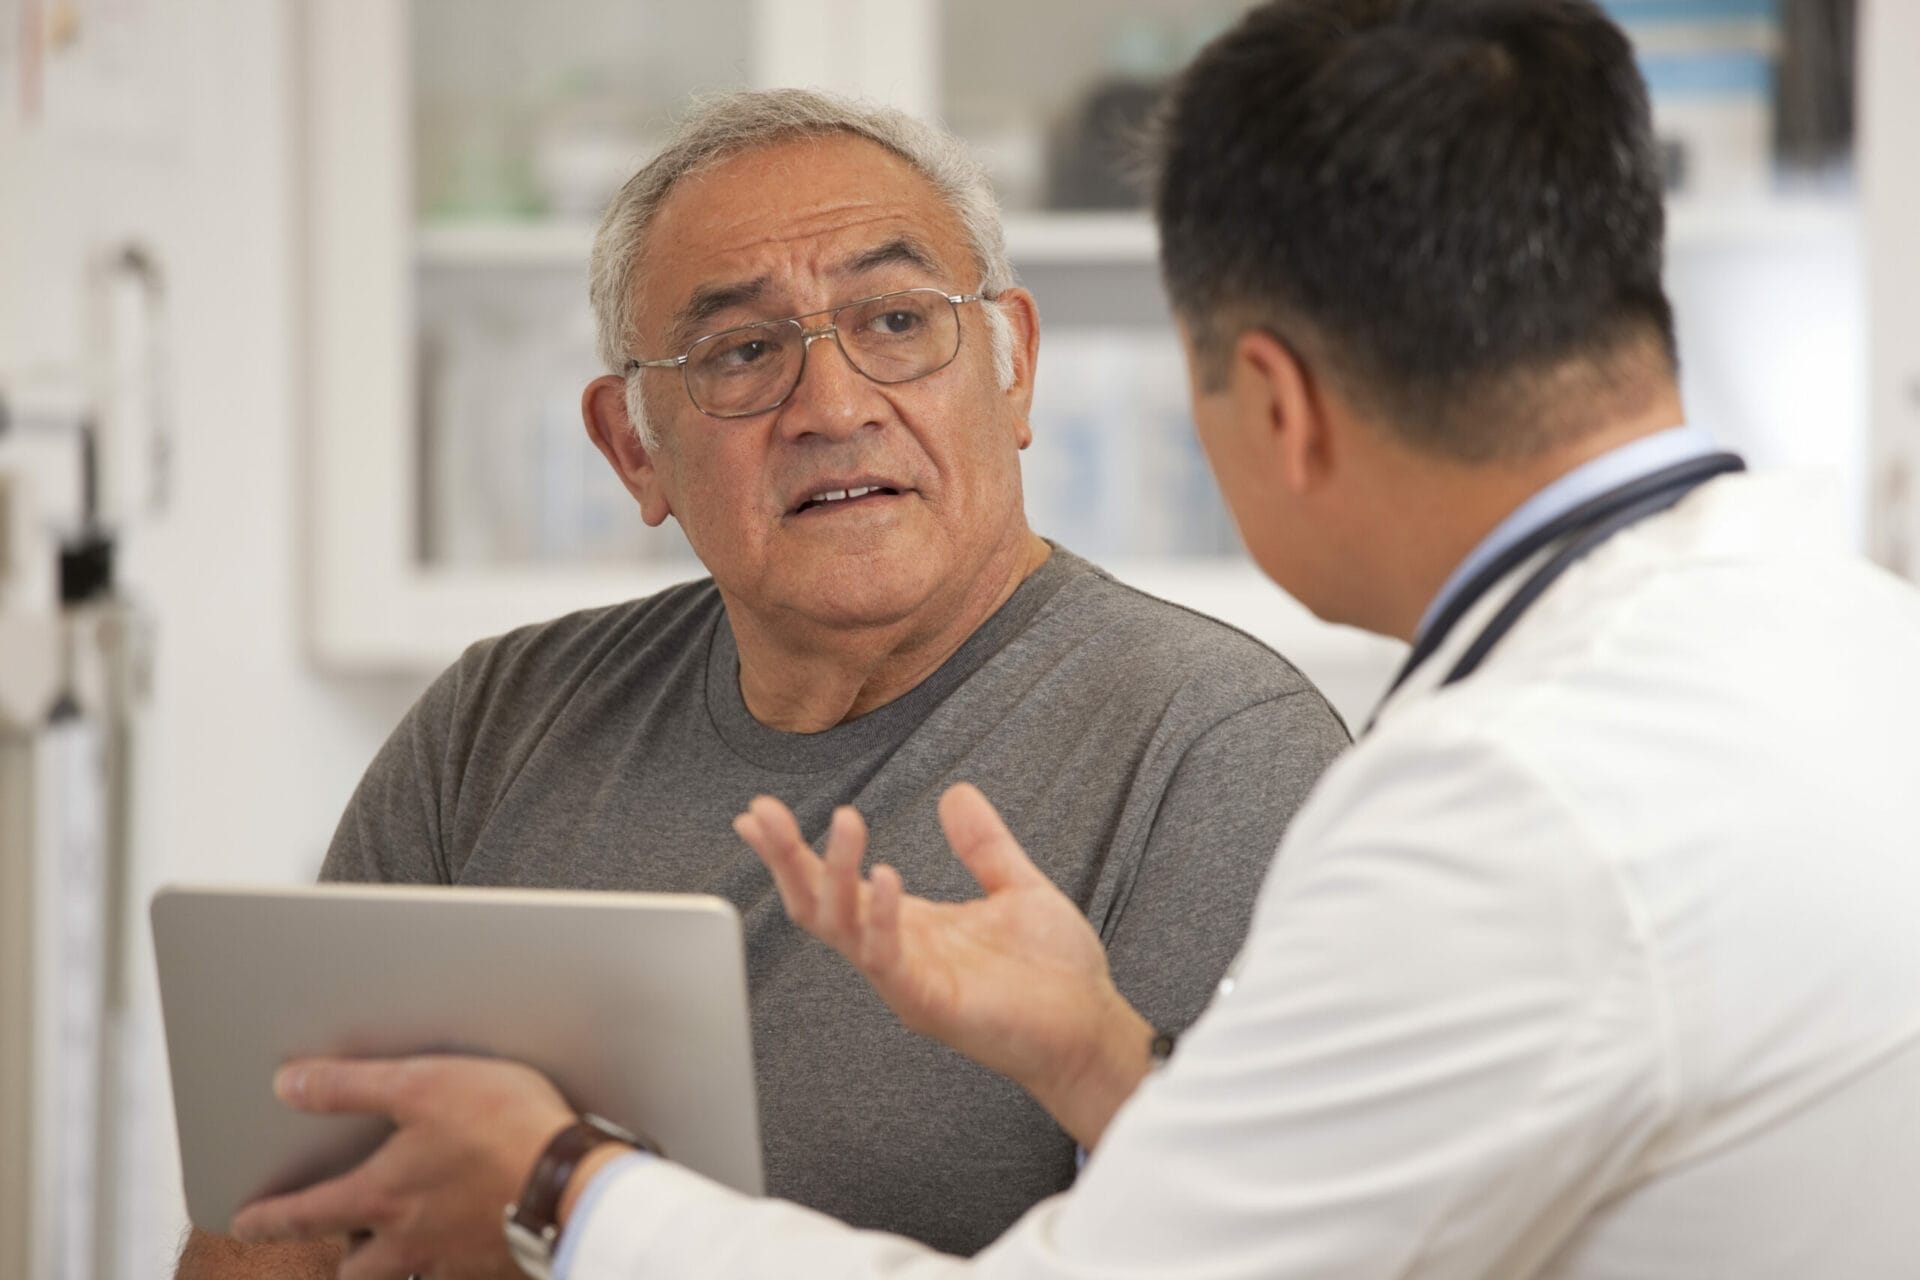 Be Aware: Patient Visits Should Include Dispelling Disinformation   